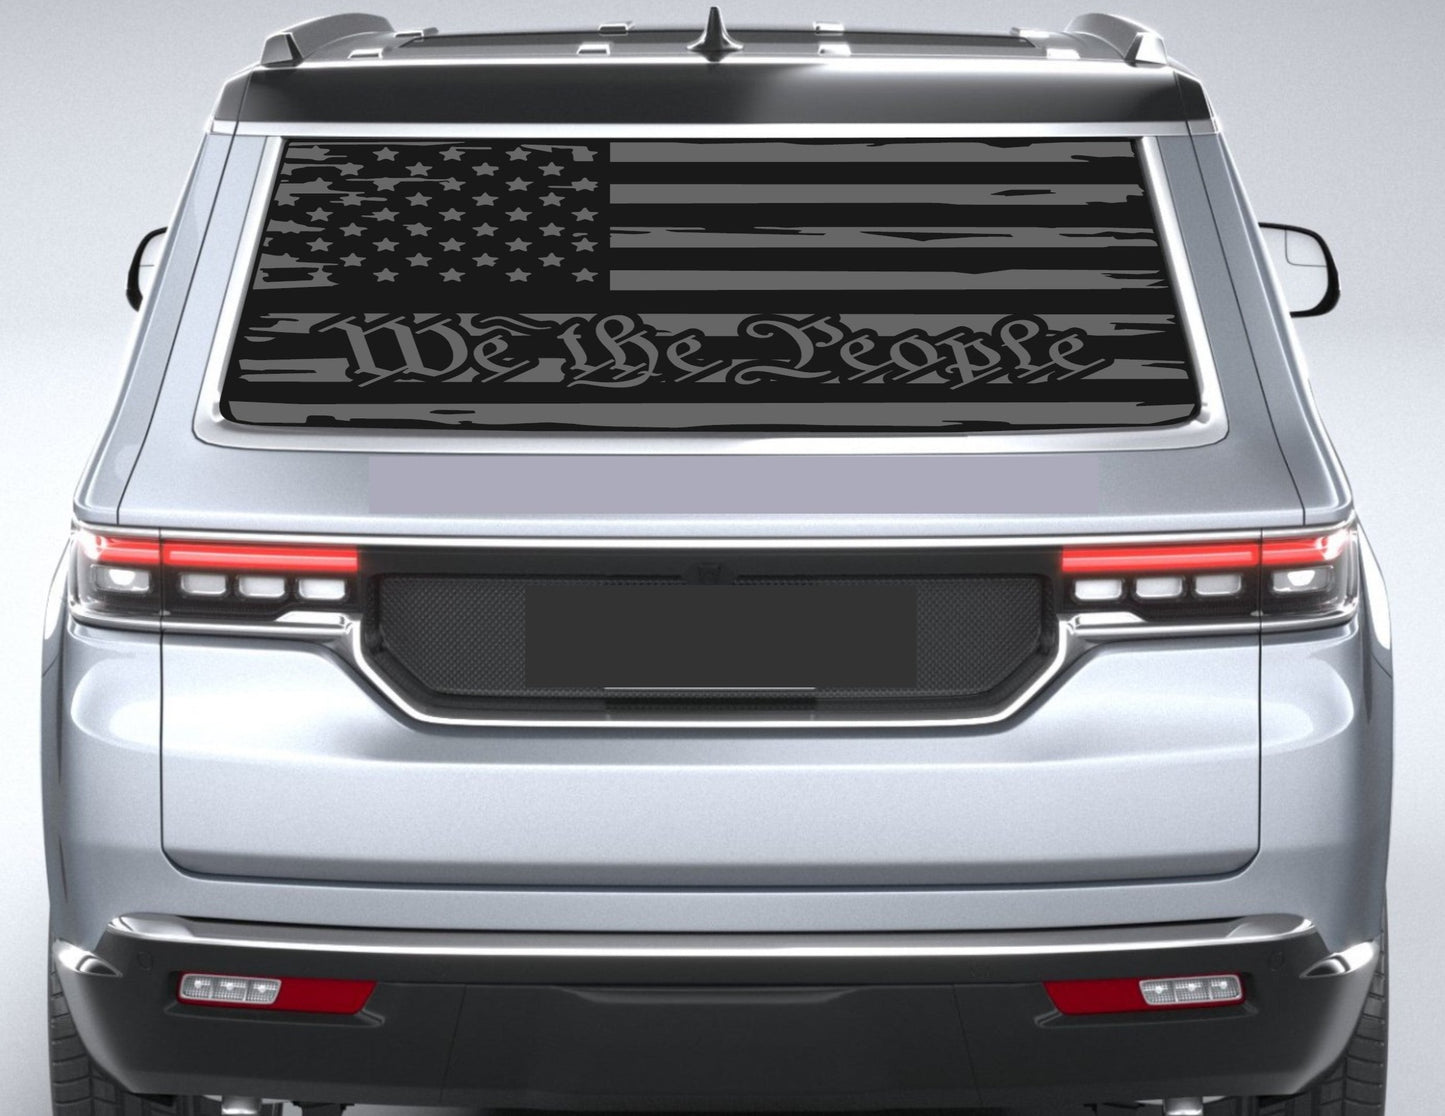 American Flag "We The People" Decal for Jeep Wagoneer Rear Window